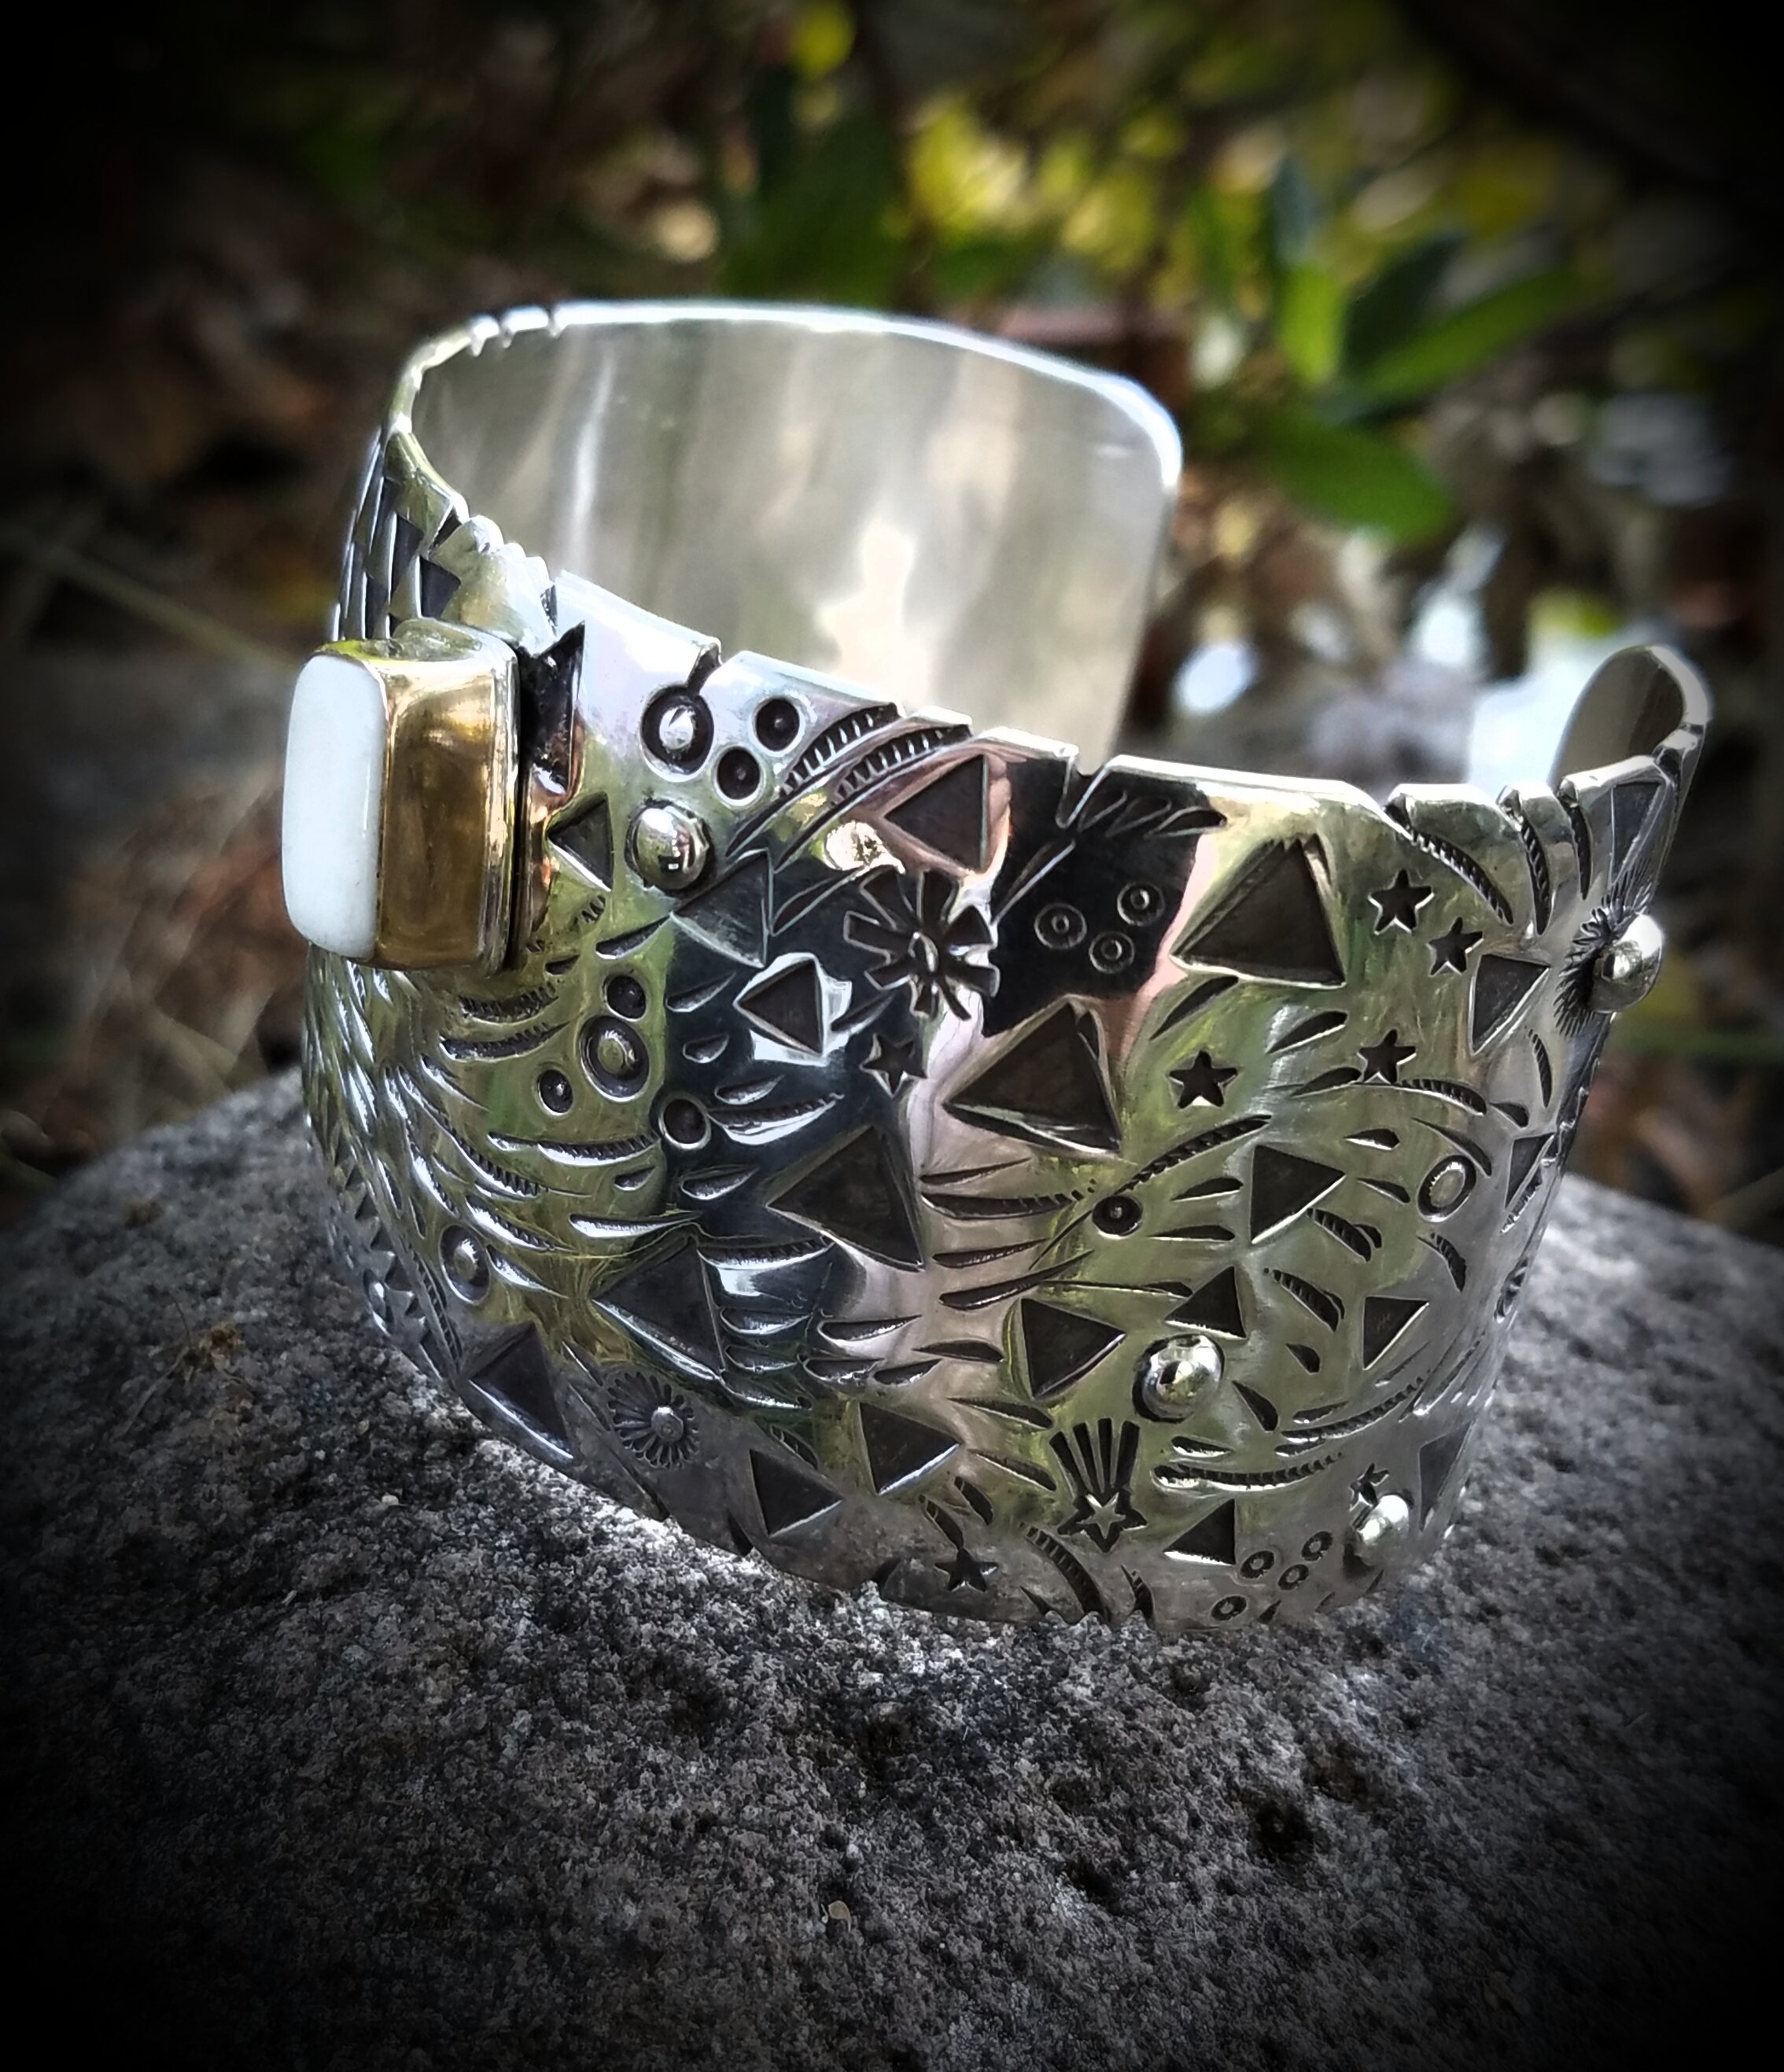 Melted Silver on Copper Cuff Bracelet – Pat Cahill Metalworks